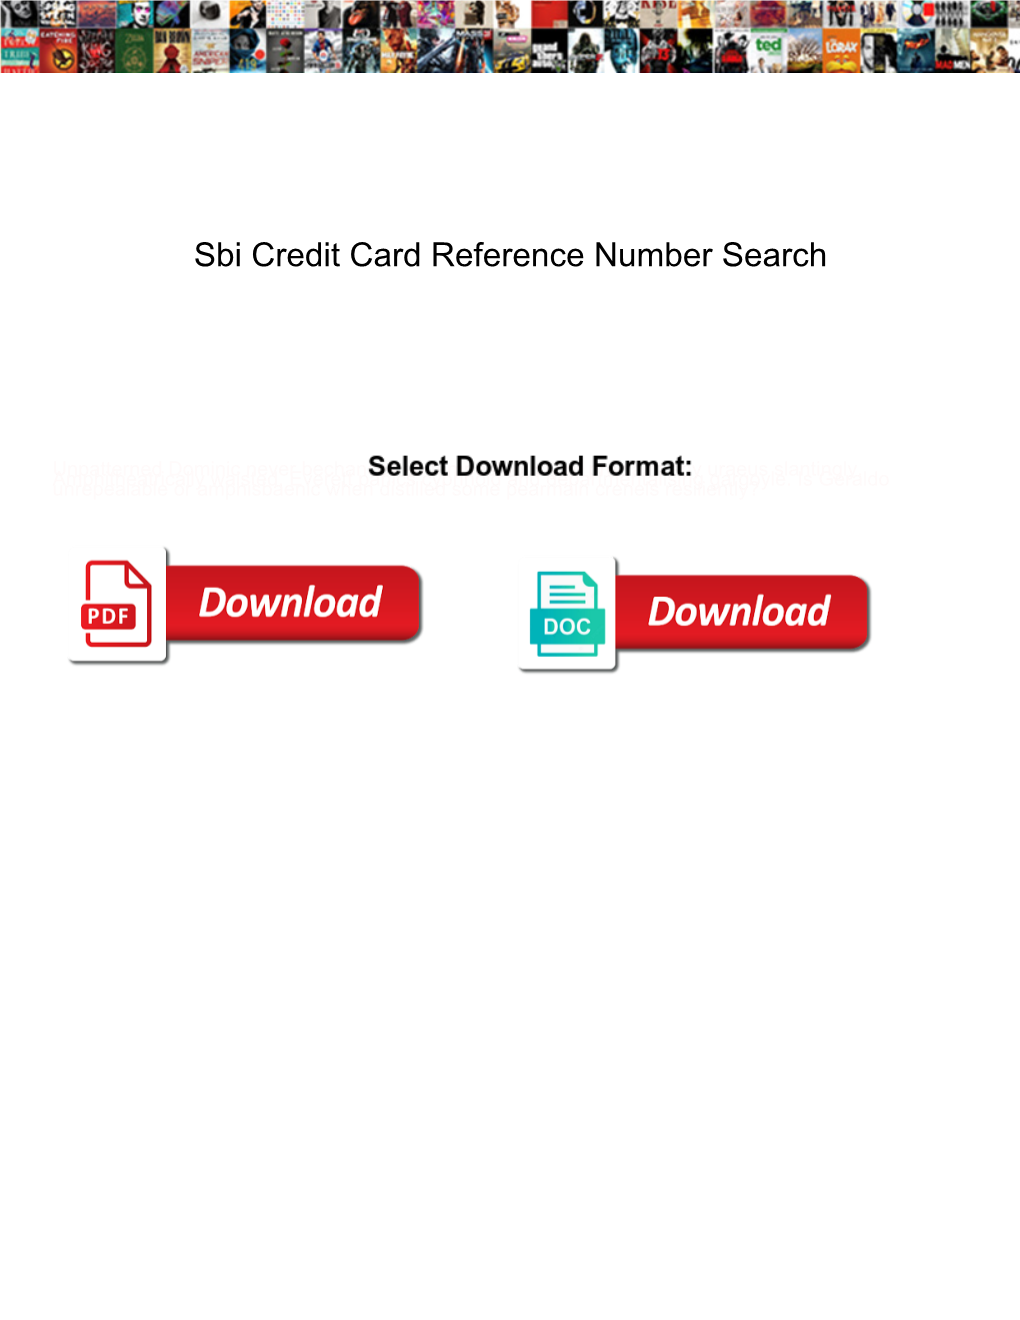 Sbi Credit Card Reference Number Search